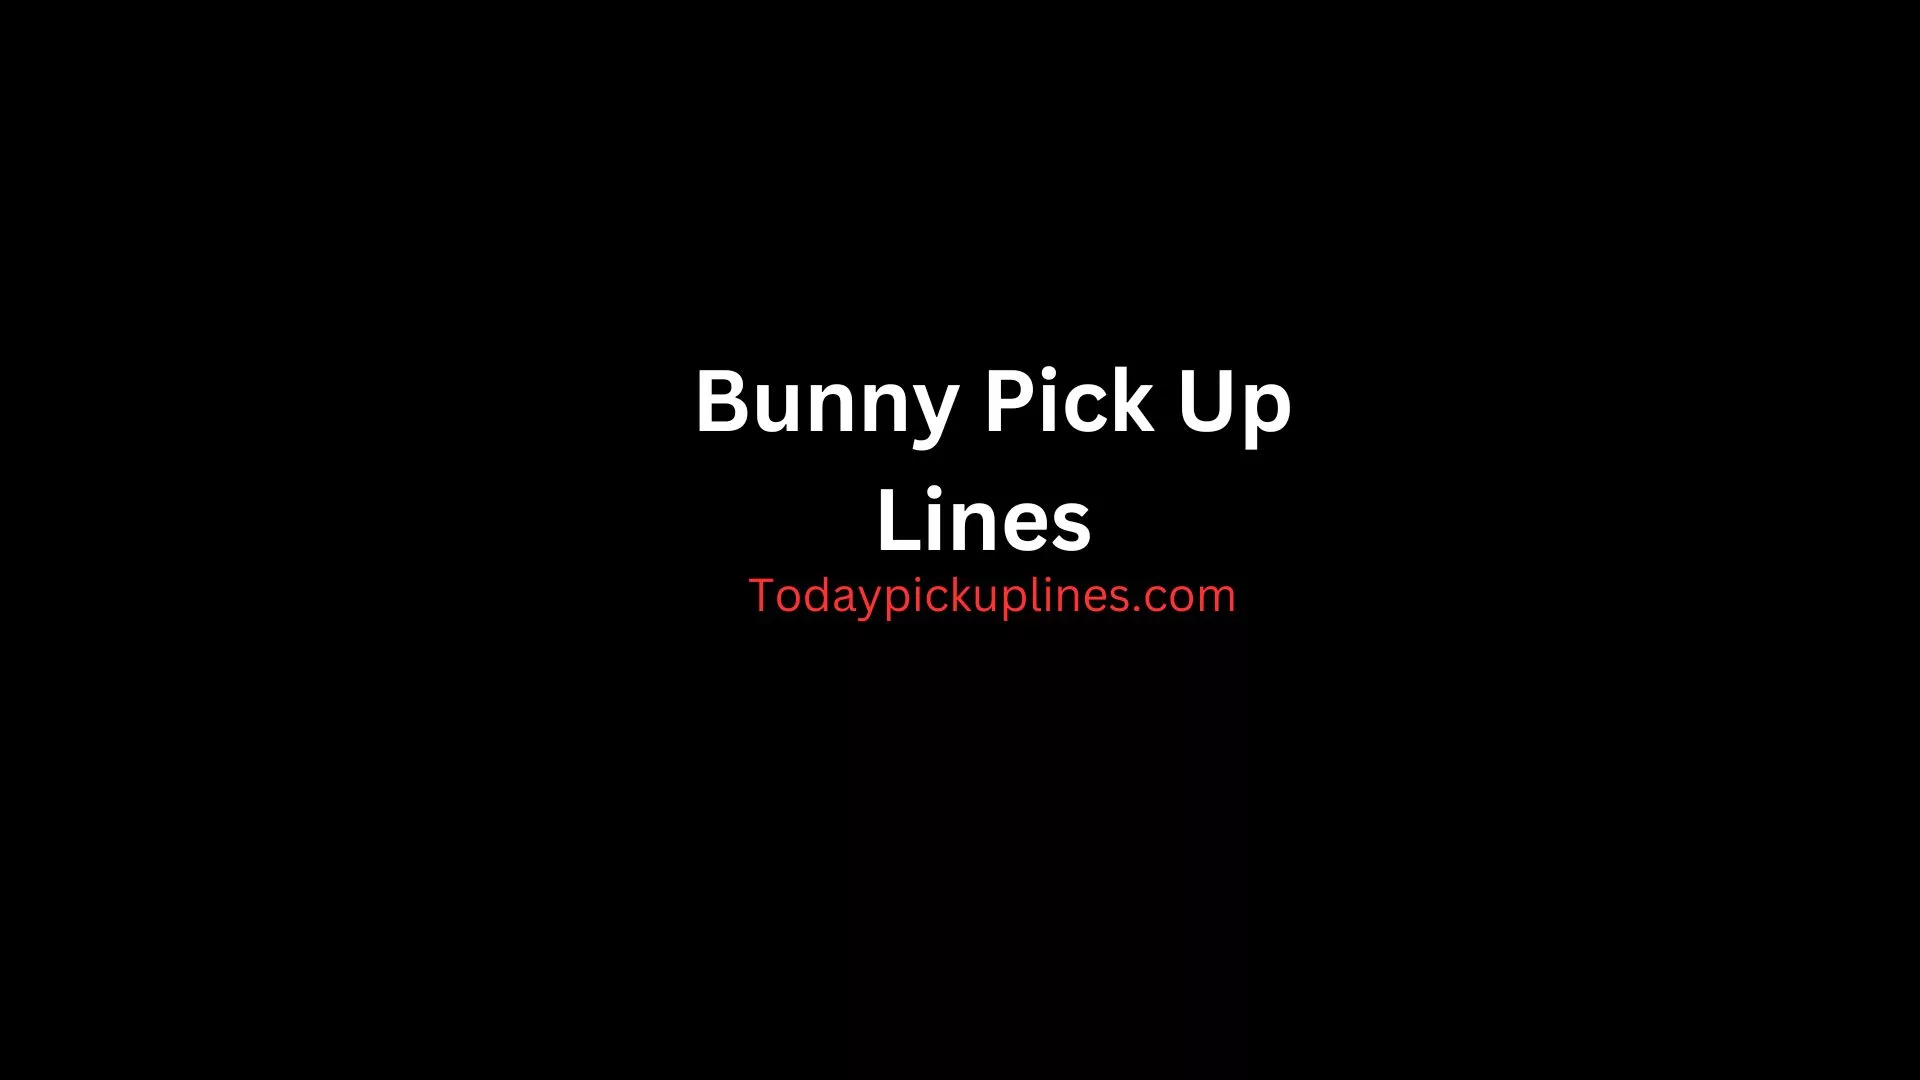 Bunny Pick Up Lines